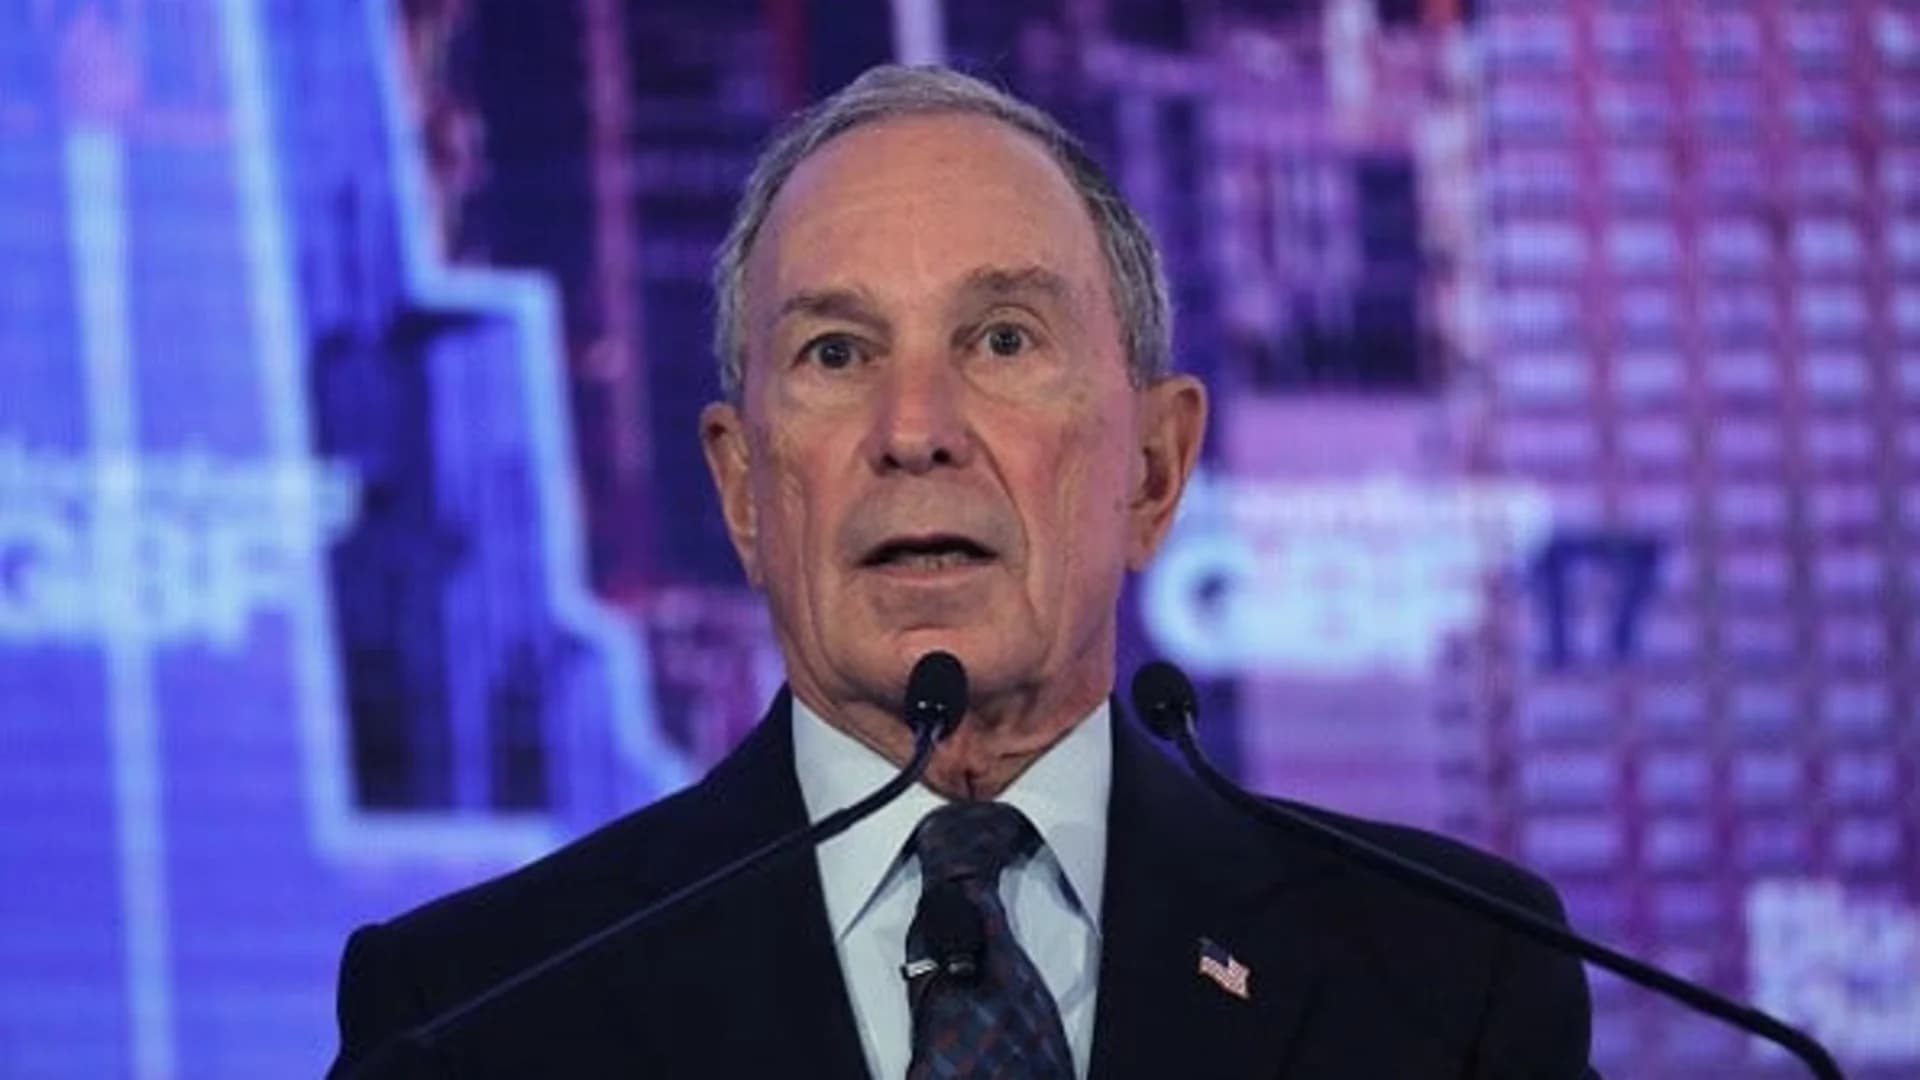 Bloomberg campaign offices in Ohio vandalized